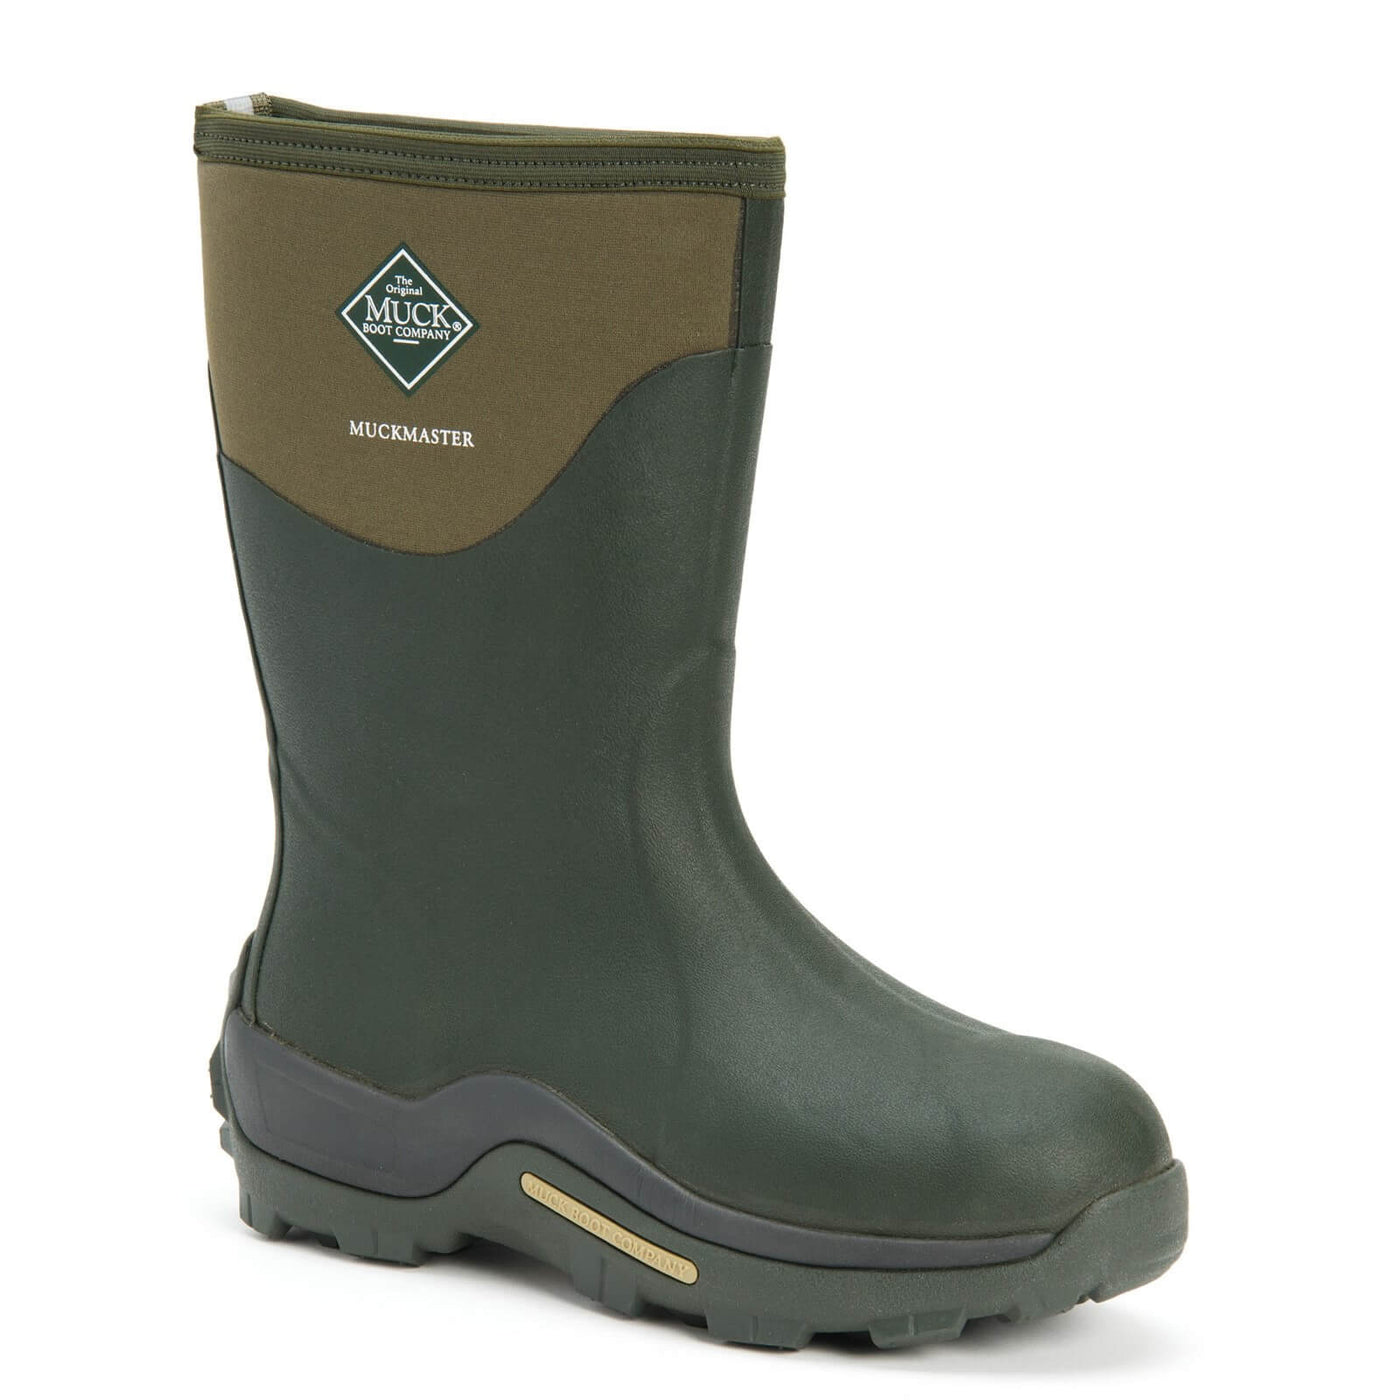 Muck Boots Muckmaster Mid Wellington boots Moss 1#colour_moss-army-green